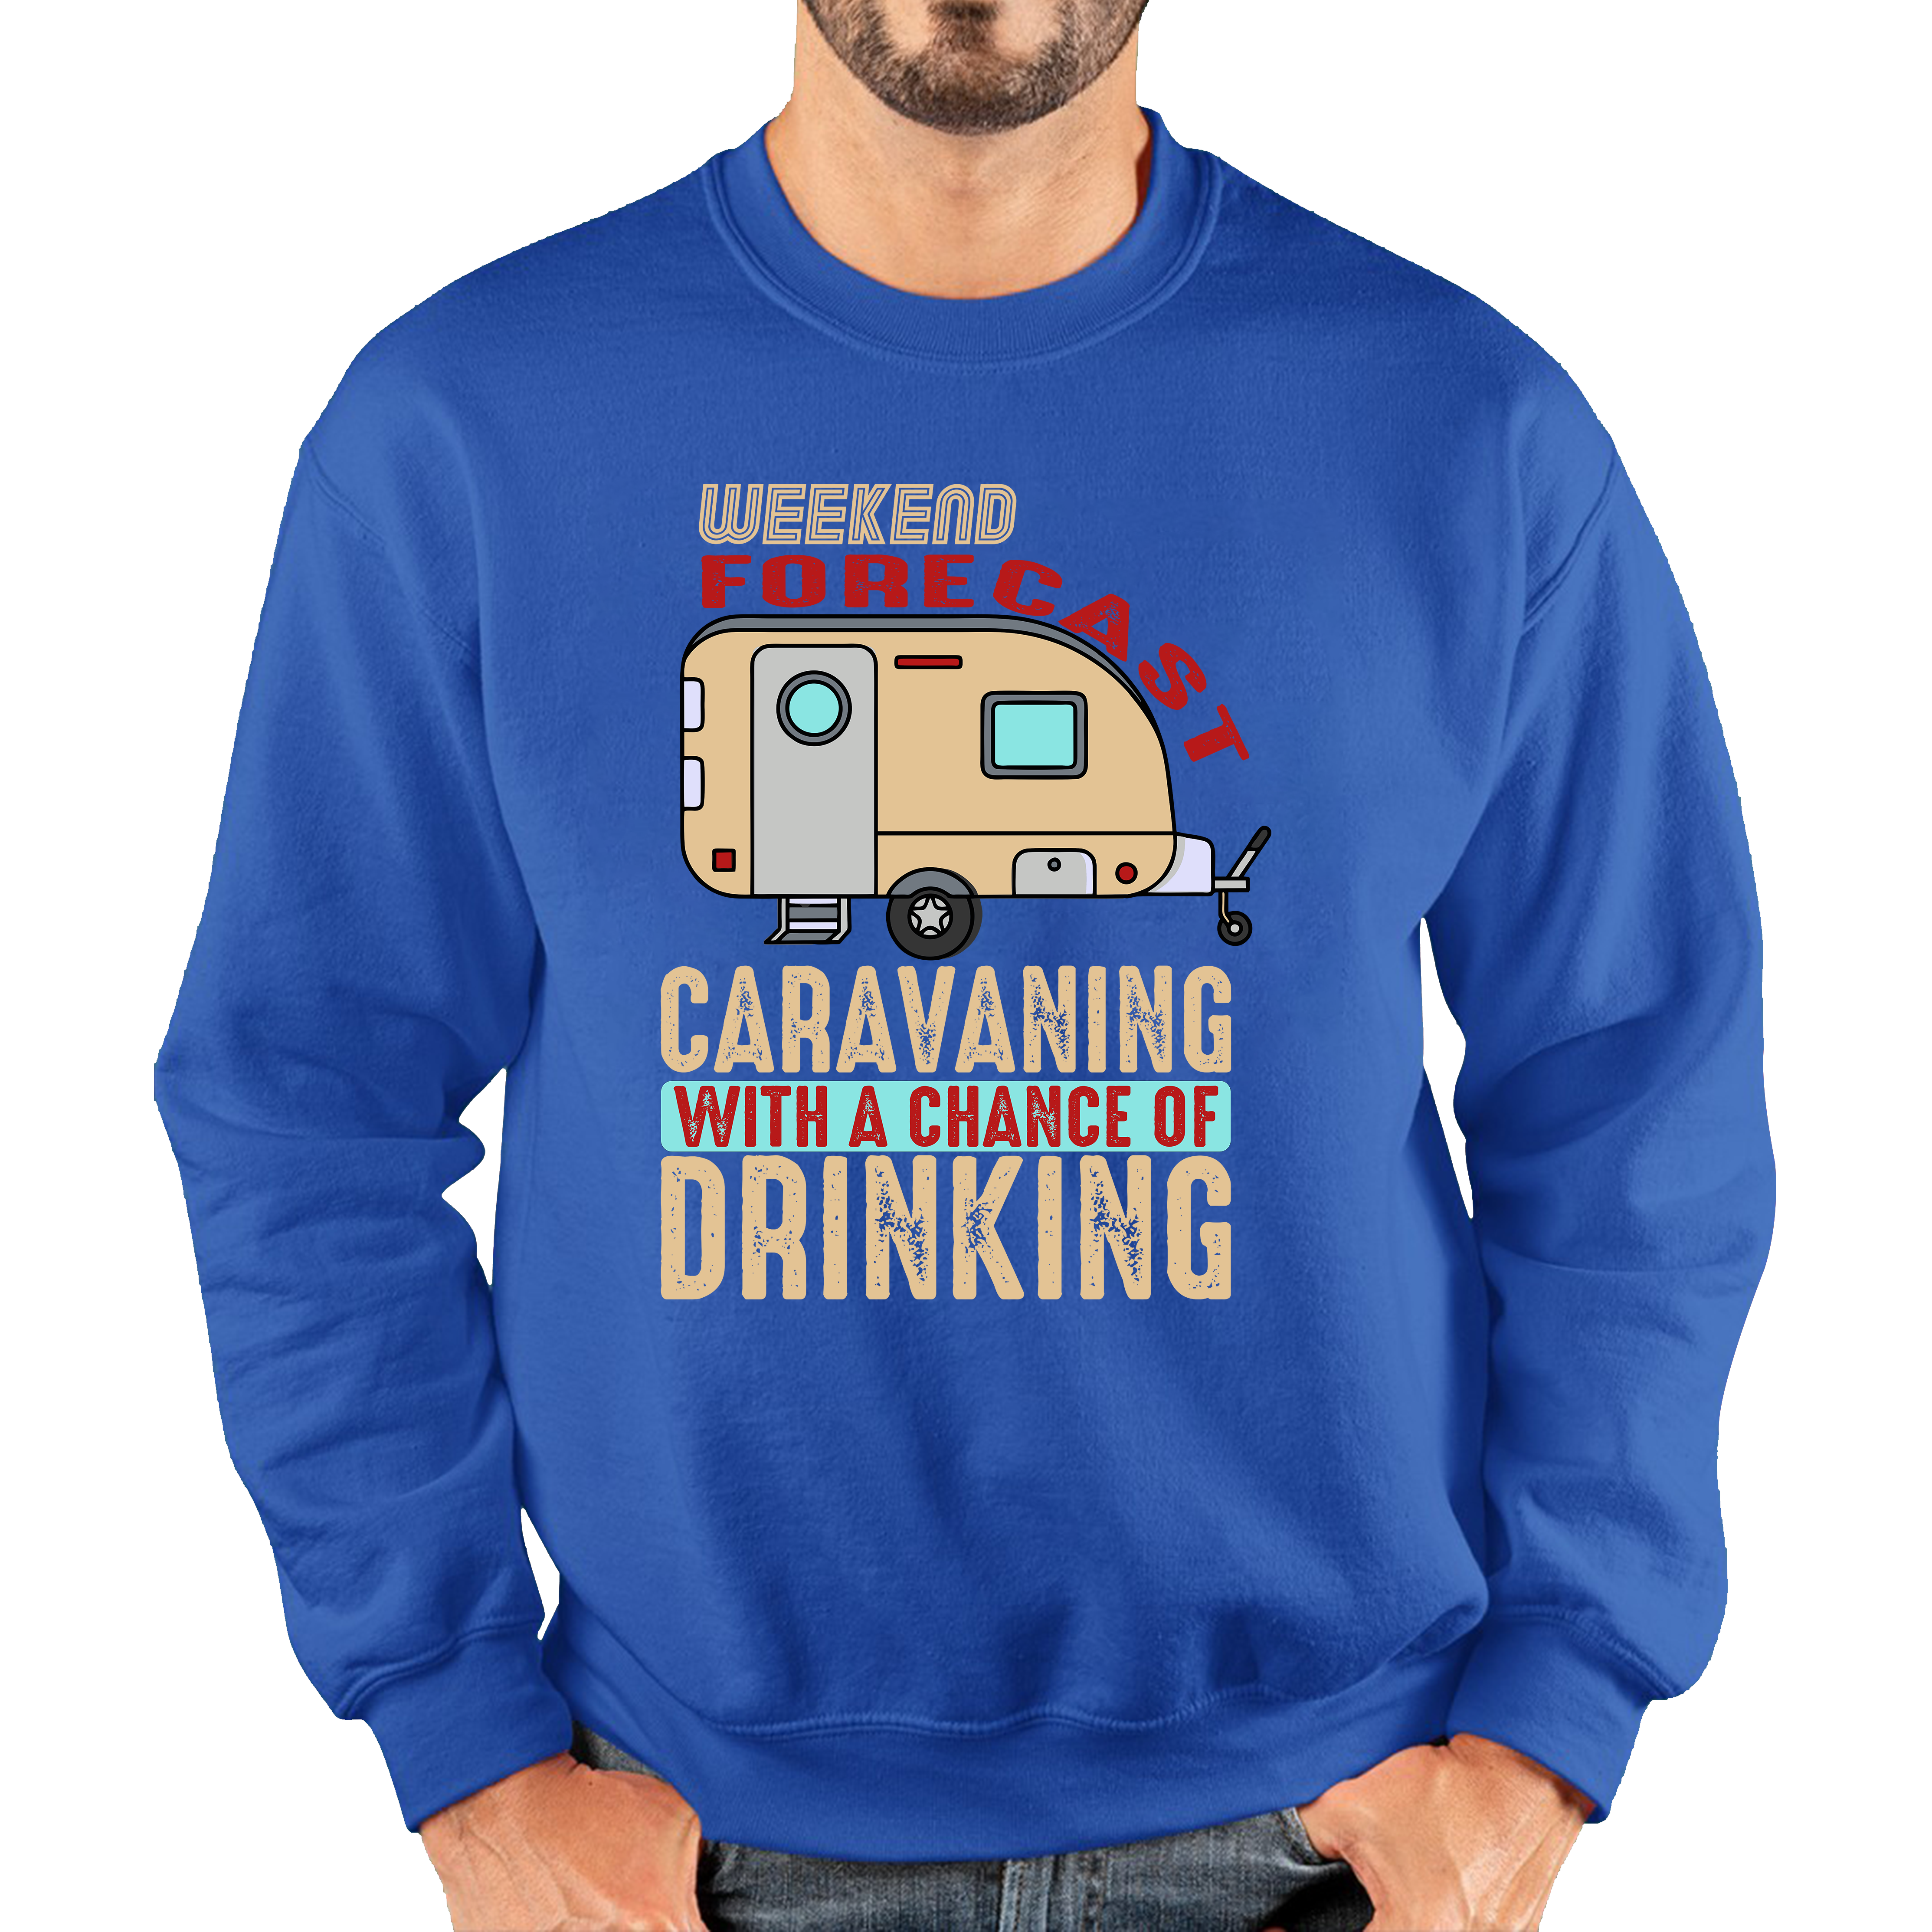 Weekend Forecast Caravanning With A Chace Of Drinking Jumper Caravan Drinking Camping Gift Unisex Sweatshirt